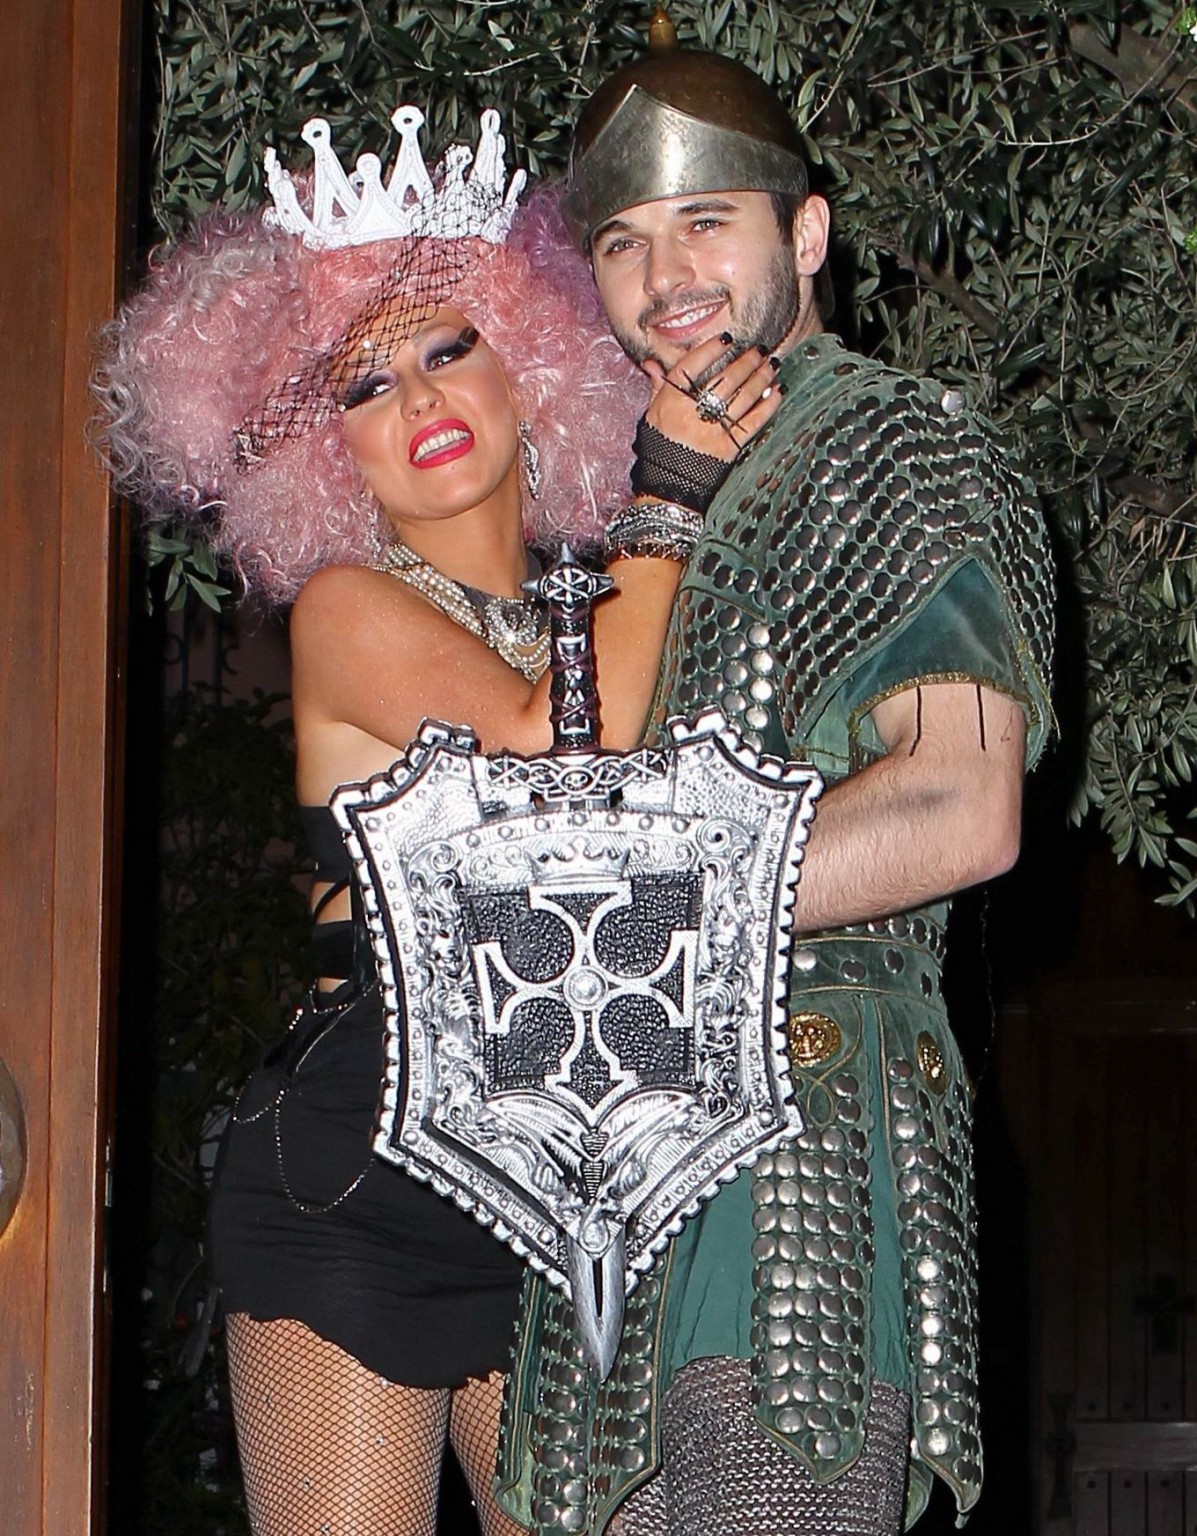 Christina Aguilera in fishnets  fuckme boots hosting a Halloween party at her ho #75249556